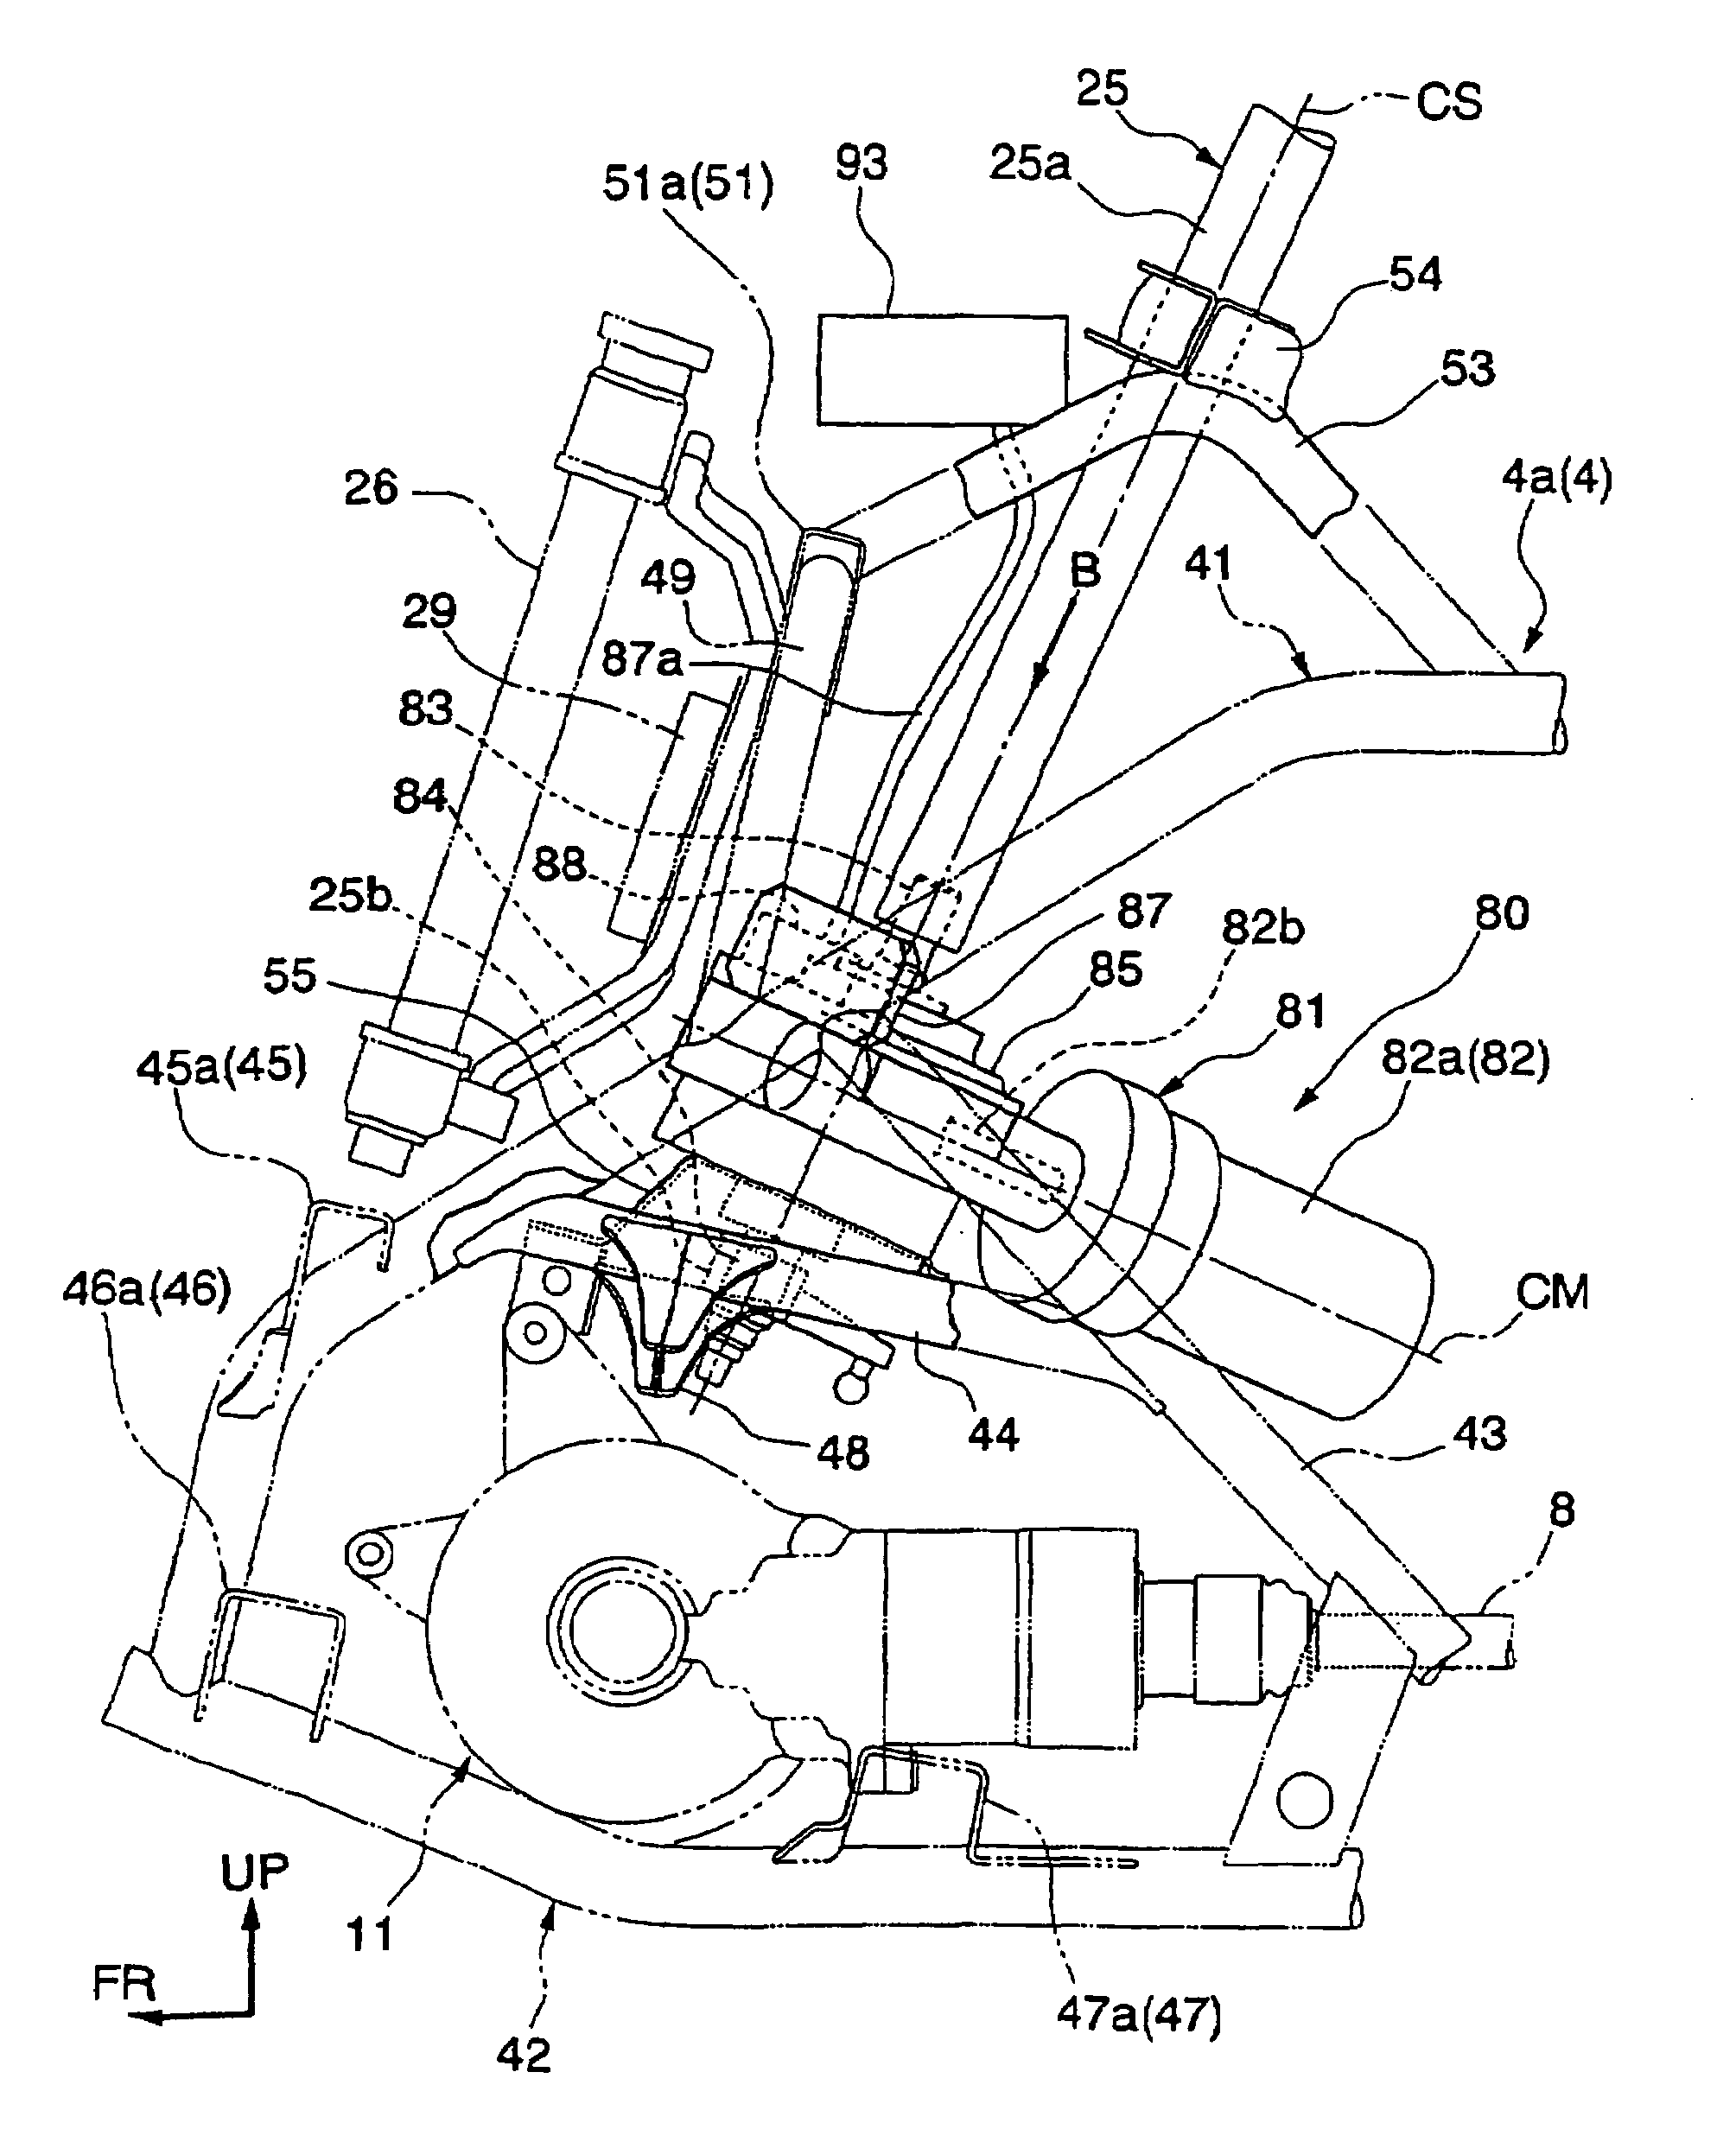 Power steering system for all-terrain vehicle